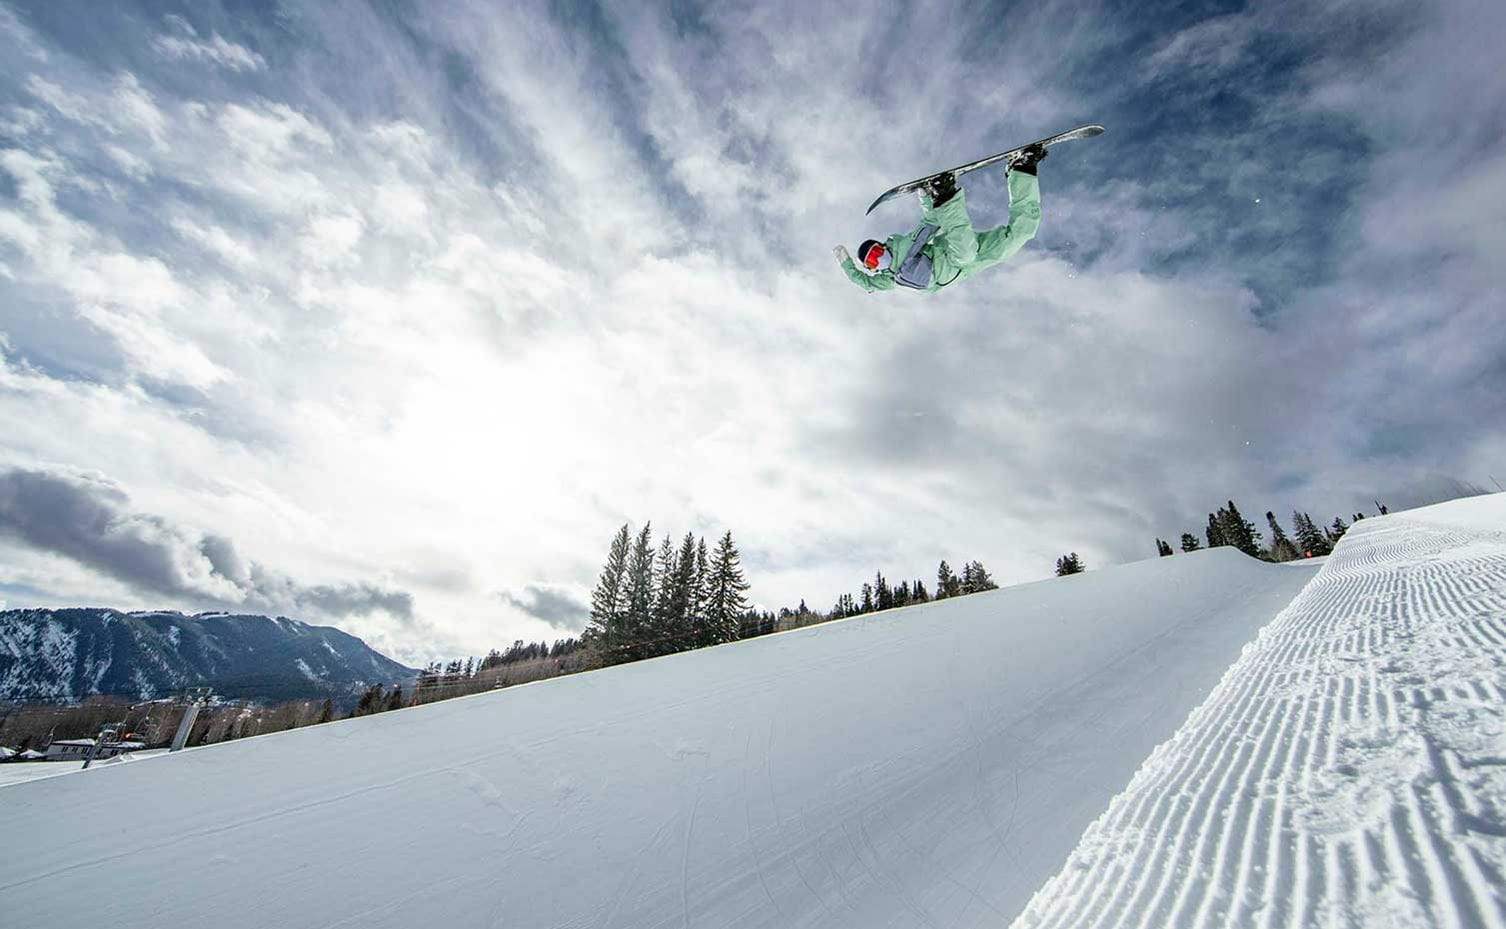 A snowboarder catches big air inside Buttermilk's famous 22-foot Superpipe